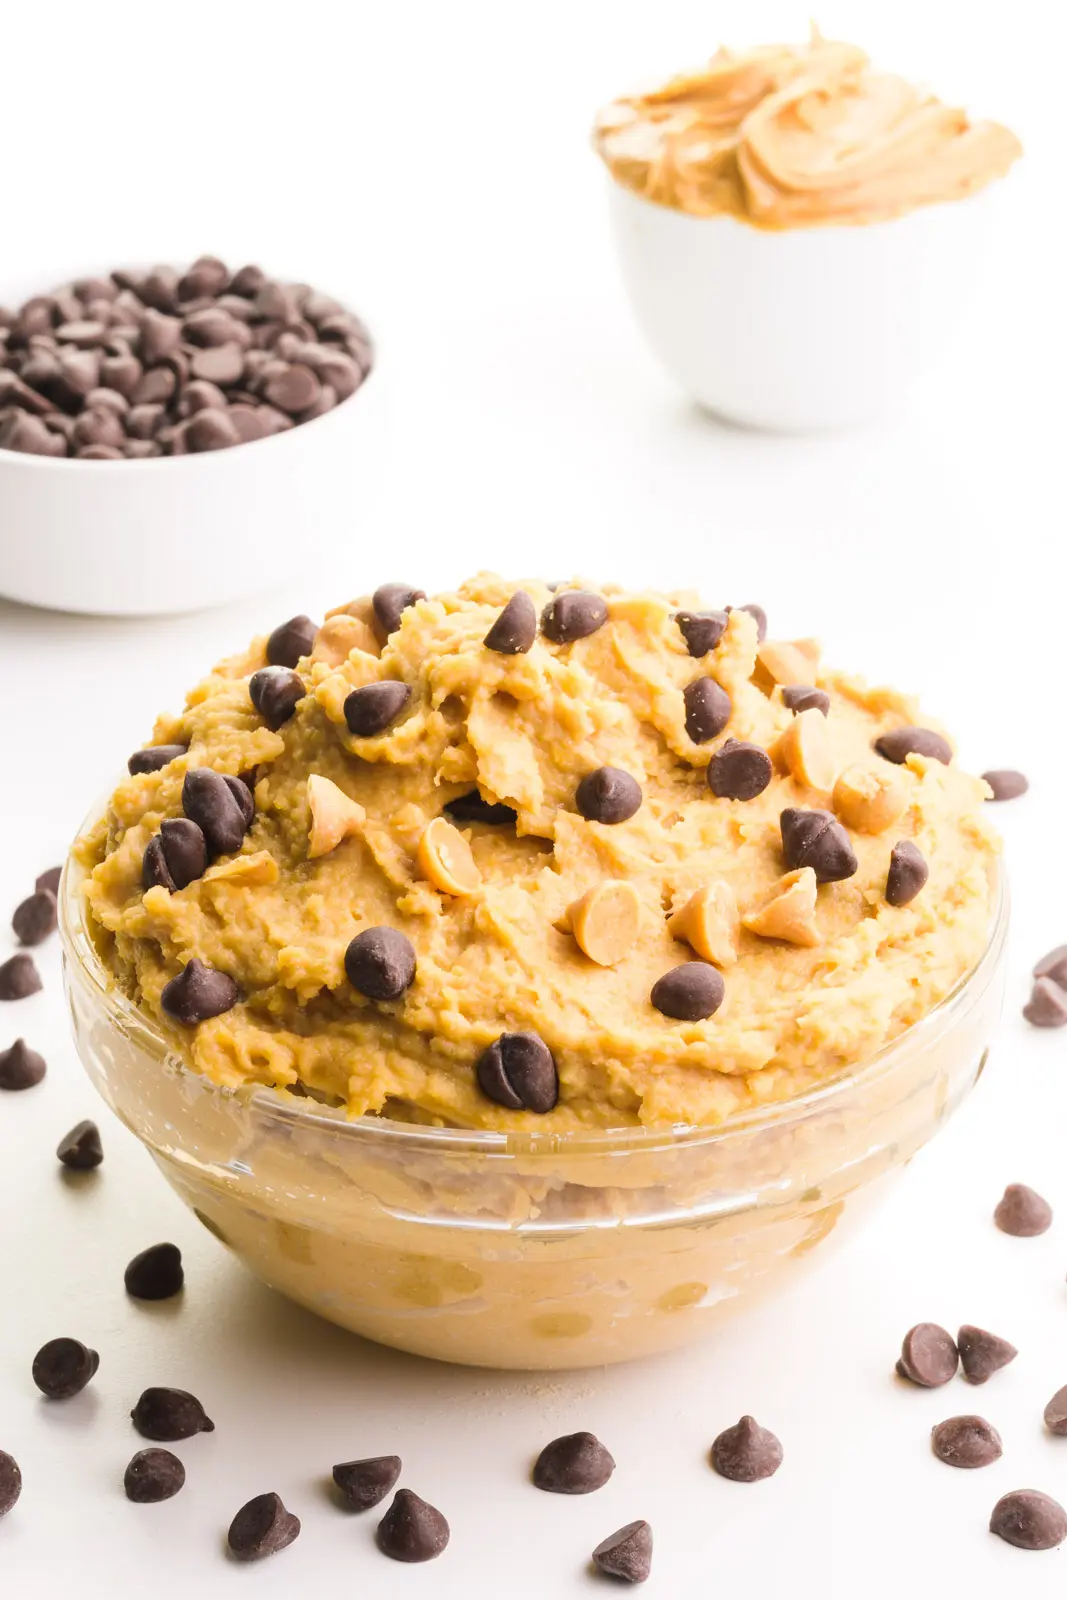 A bowl of cookie dough has chocolate chips around it. There's a bowl of chocolate chips and peanut butter behind it.